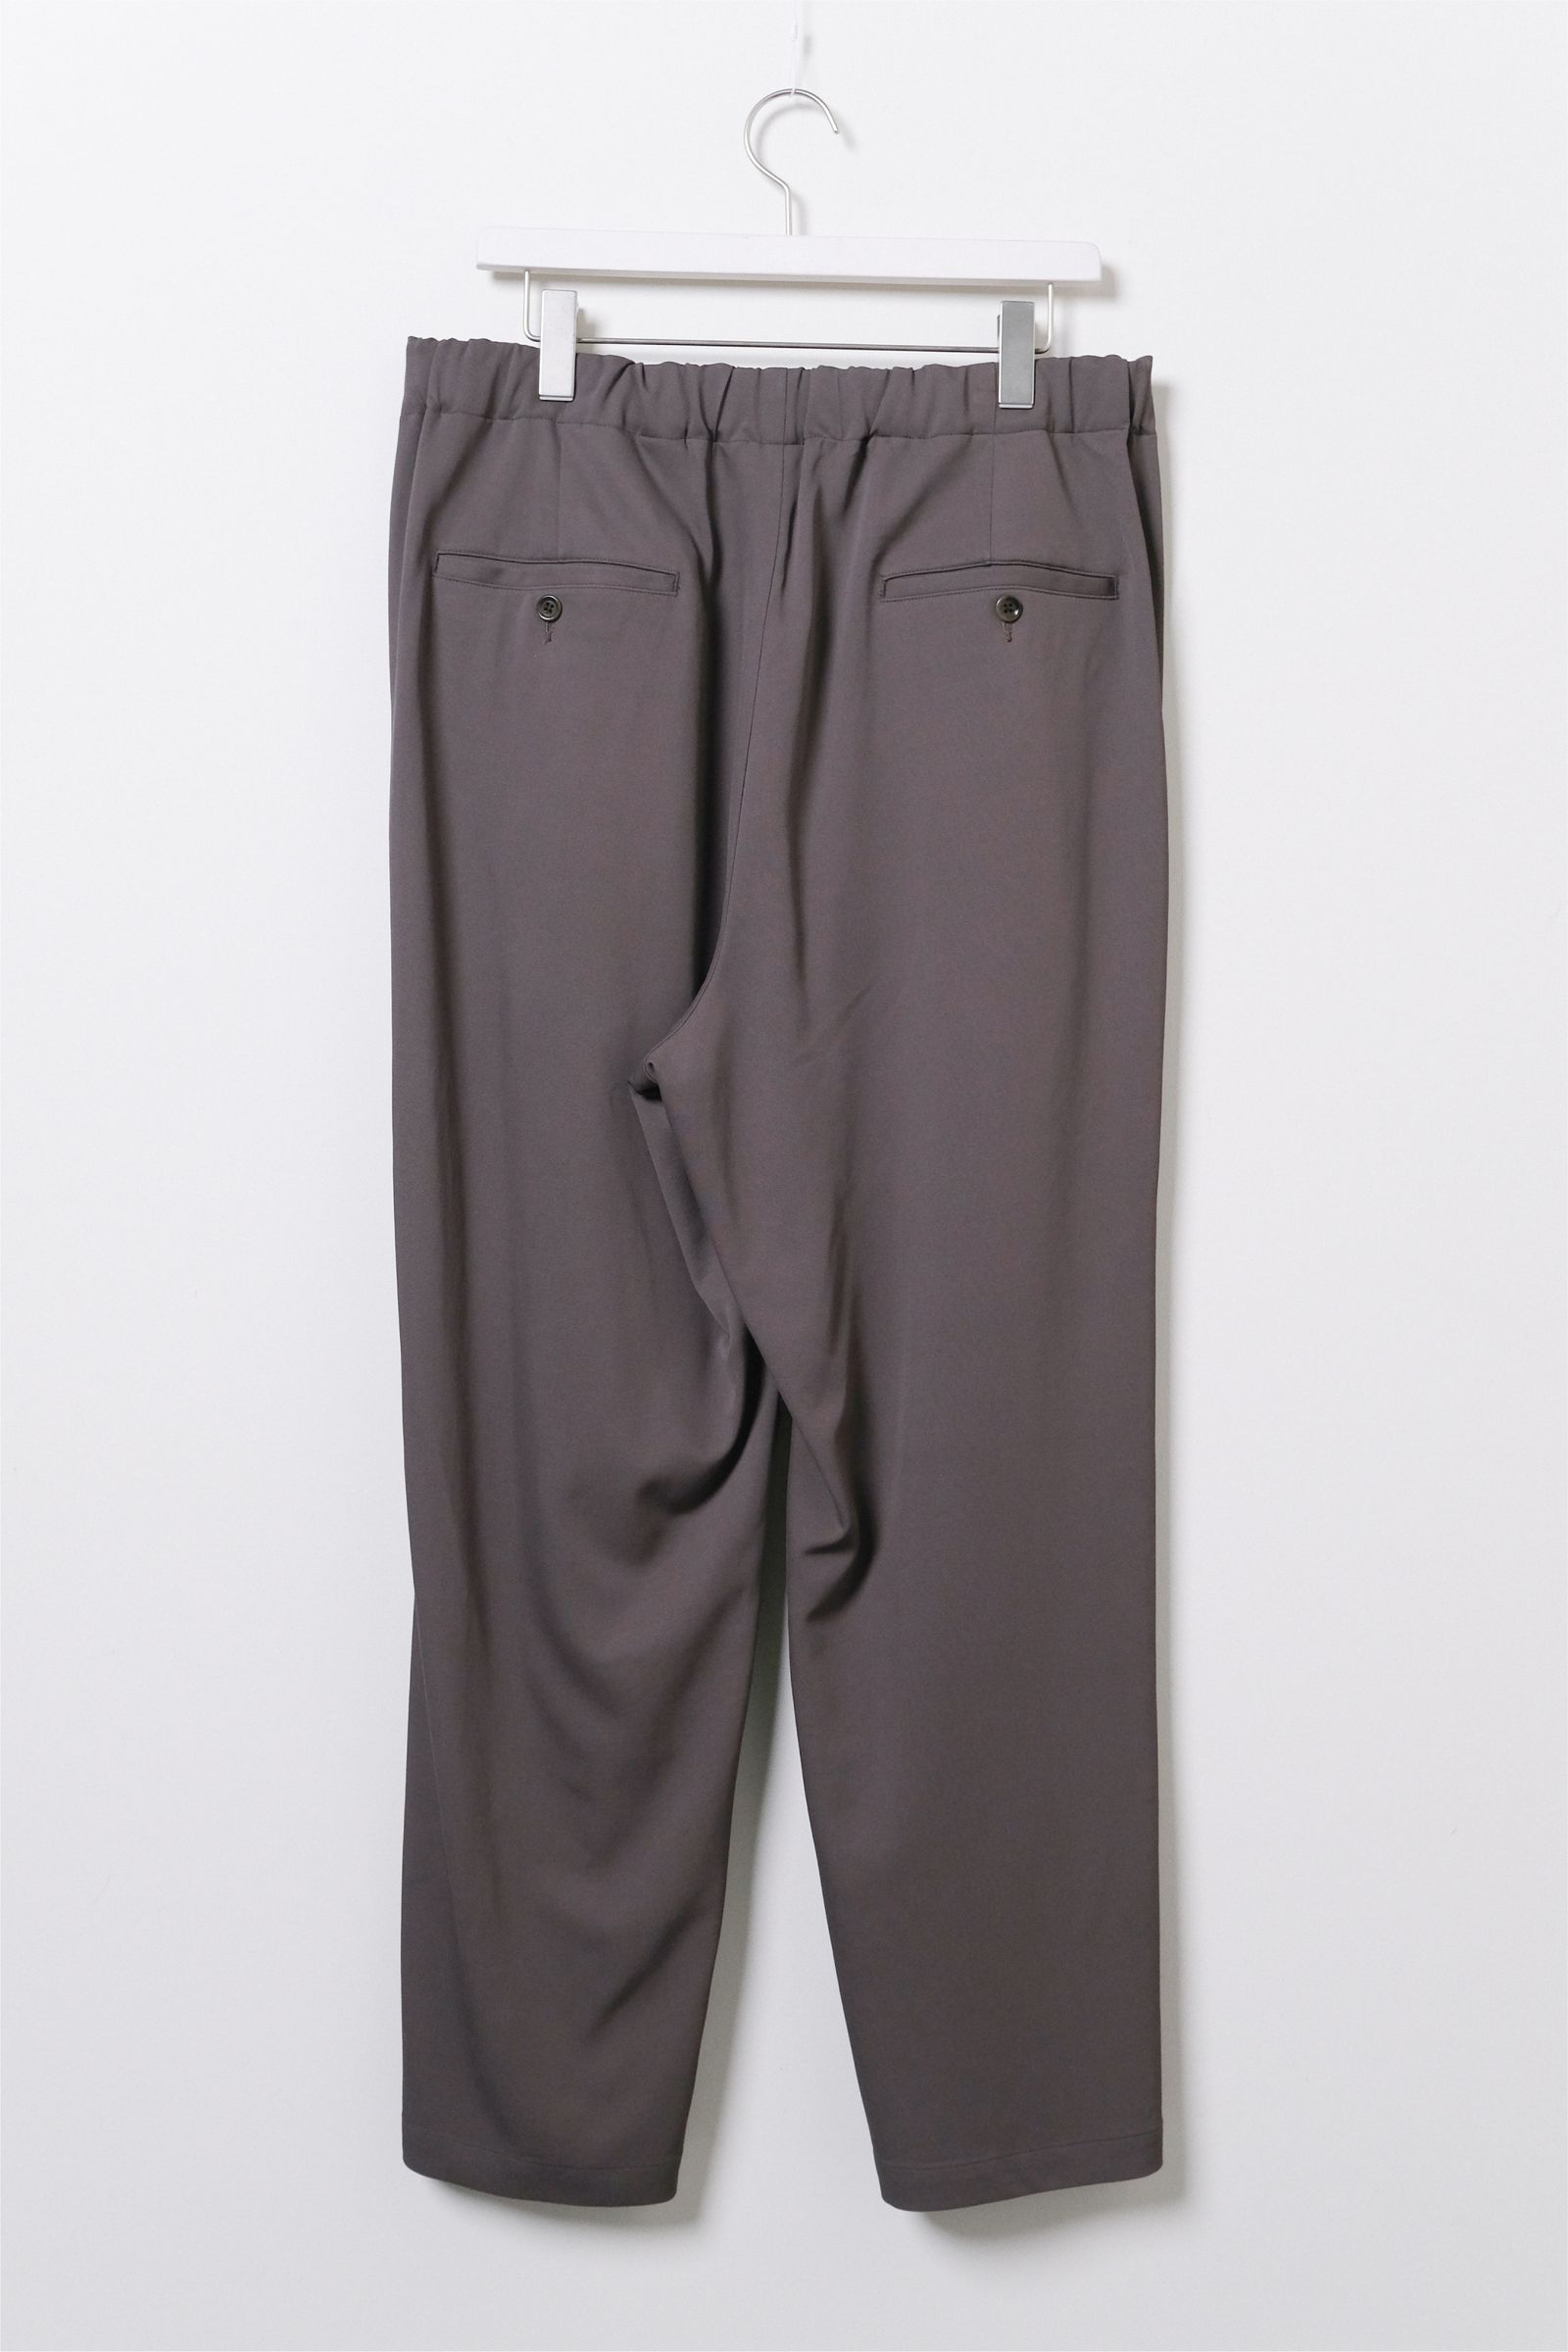 WEWILL - informal trousers -khaki- 23aw | asterisk